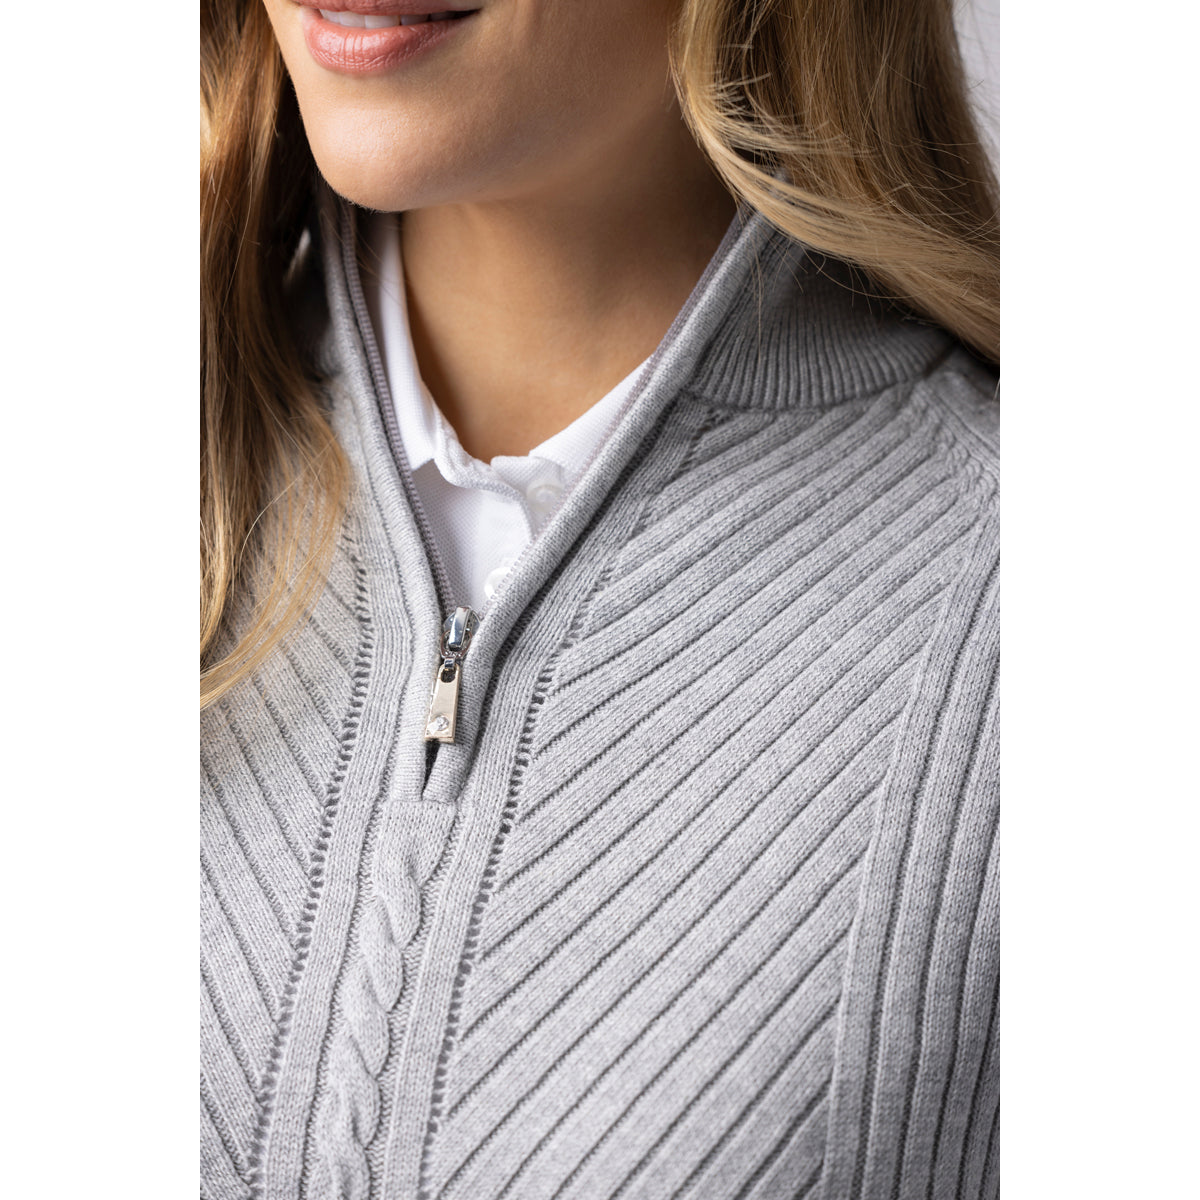 Glenmuir Ladies Rib & Cable Design Zip-Neck Sweater with Cashmere in Light Grey Marl